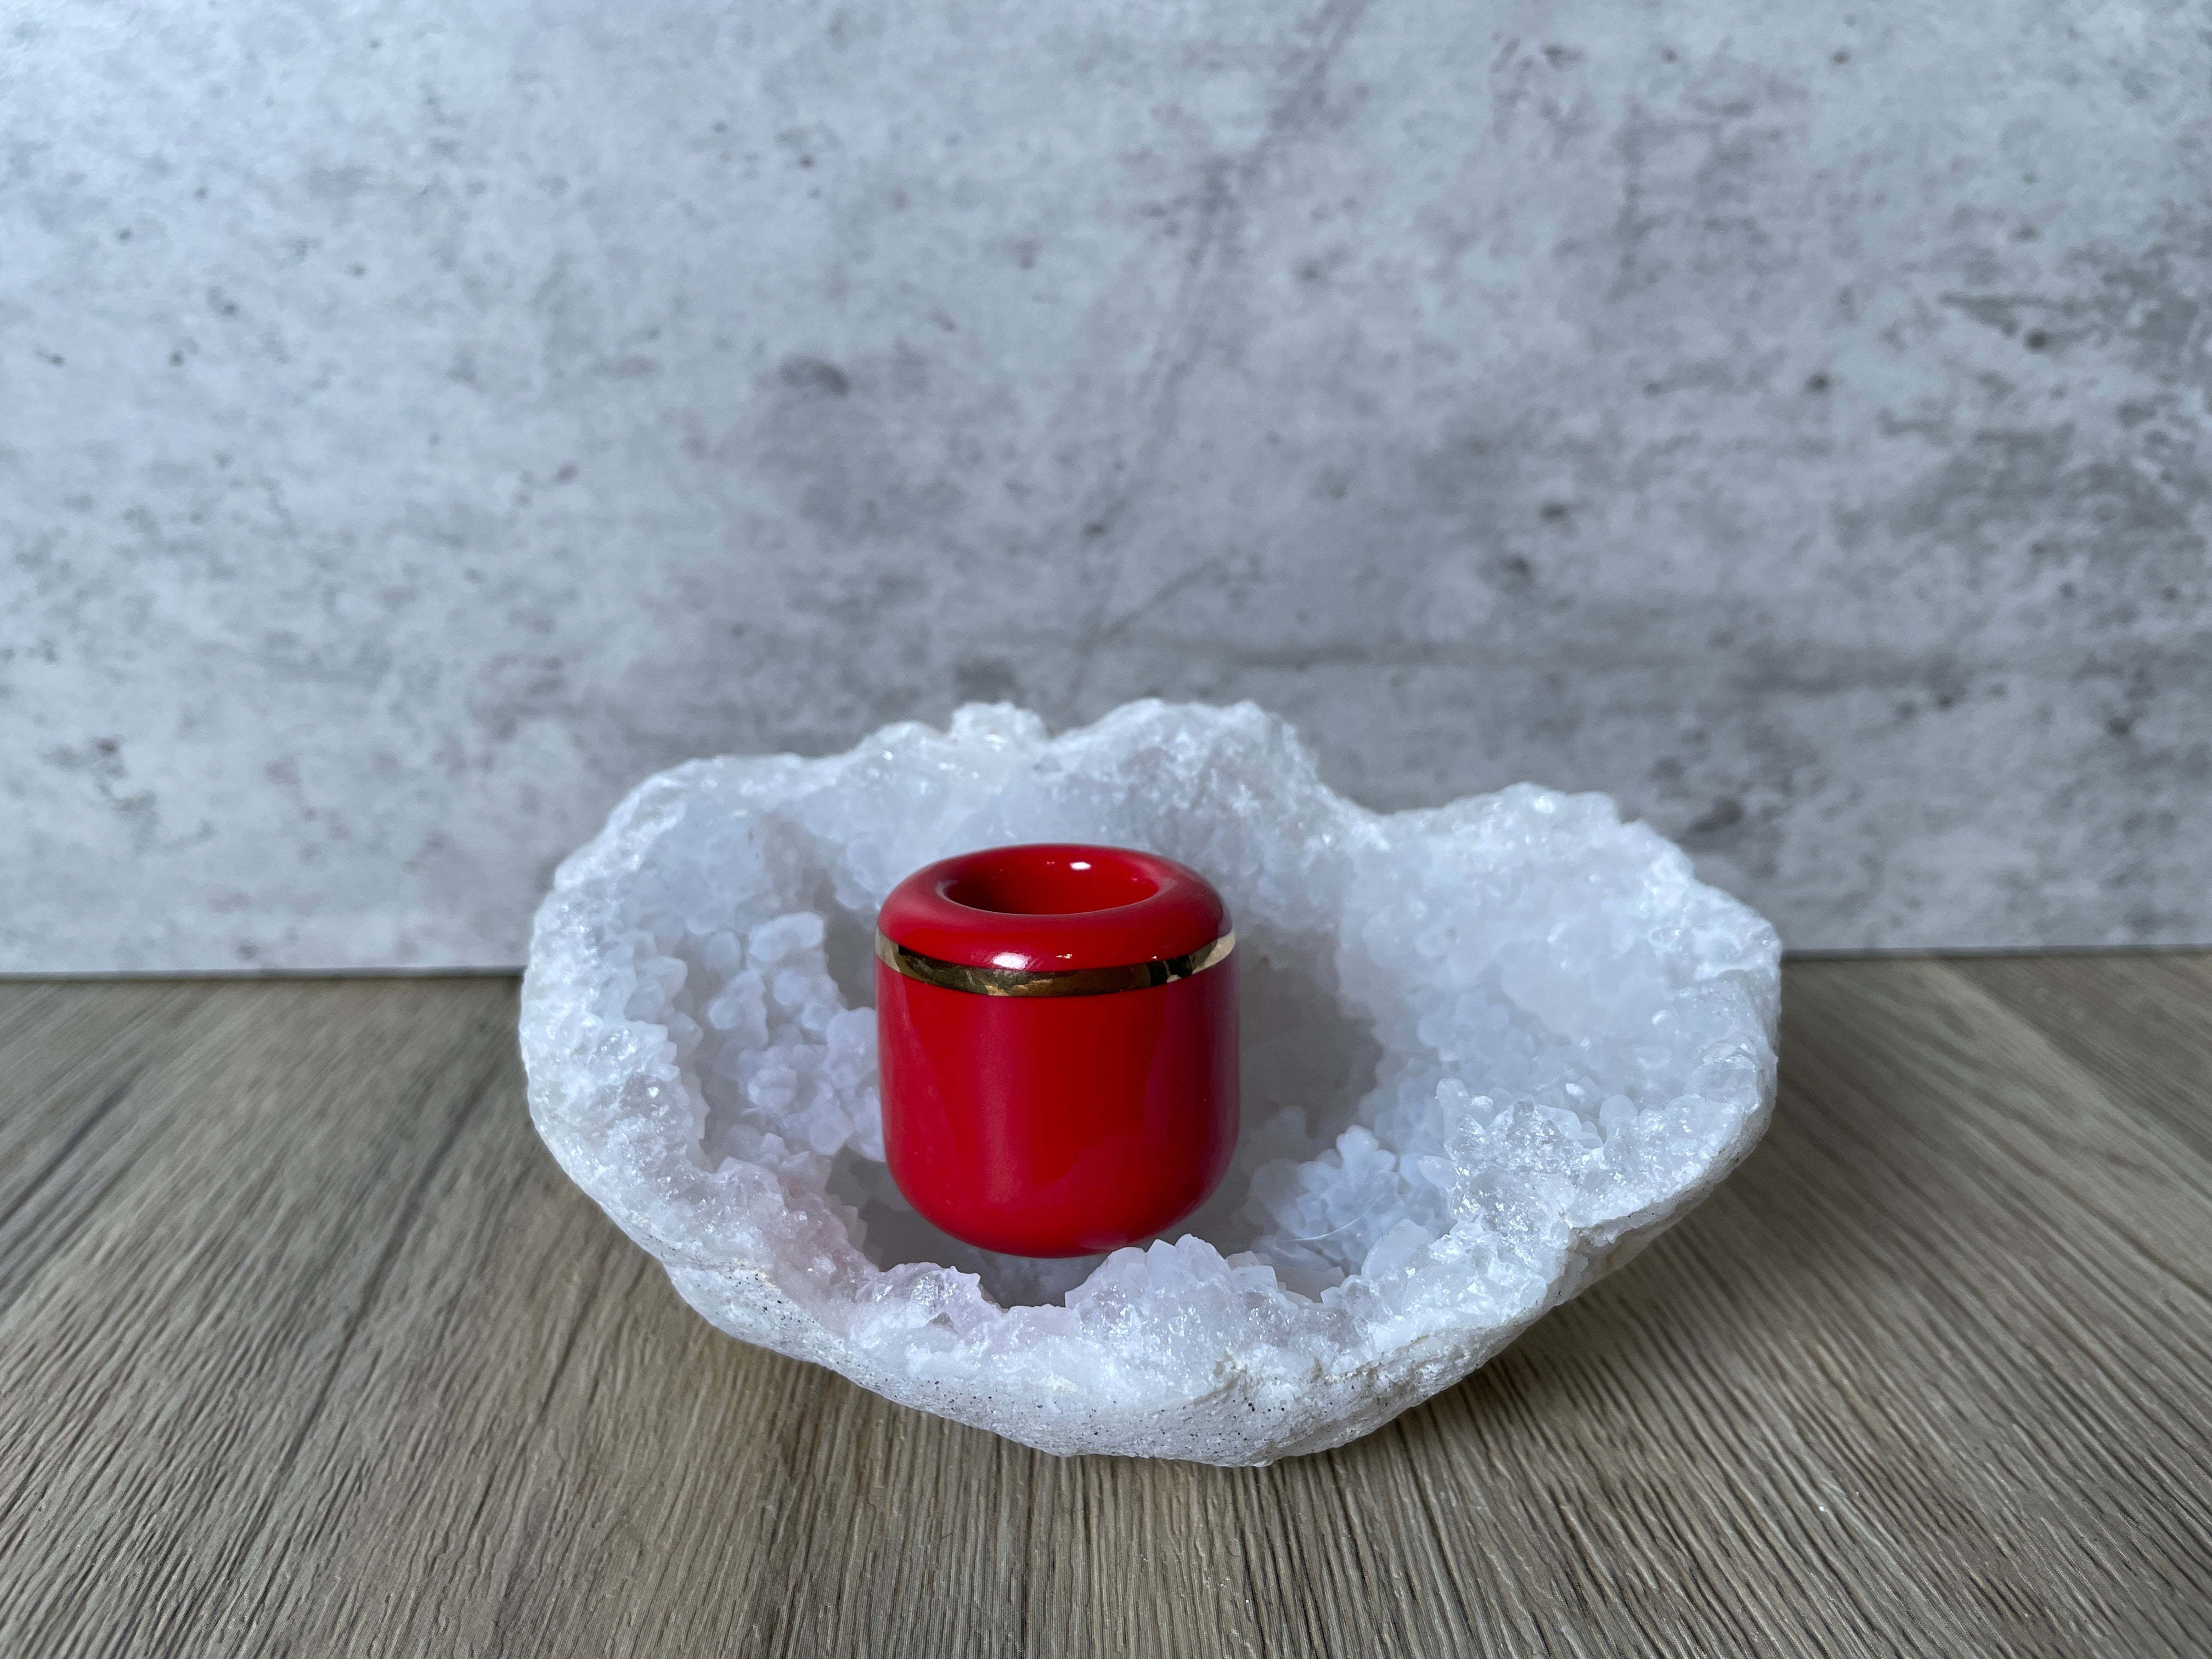 Buy Online Latest and Unique Red Chime Candle Holder - Ceramic with Gold Band | Shop Best Spiritual Items - The Mystical Ritual